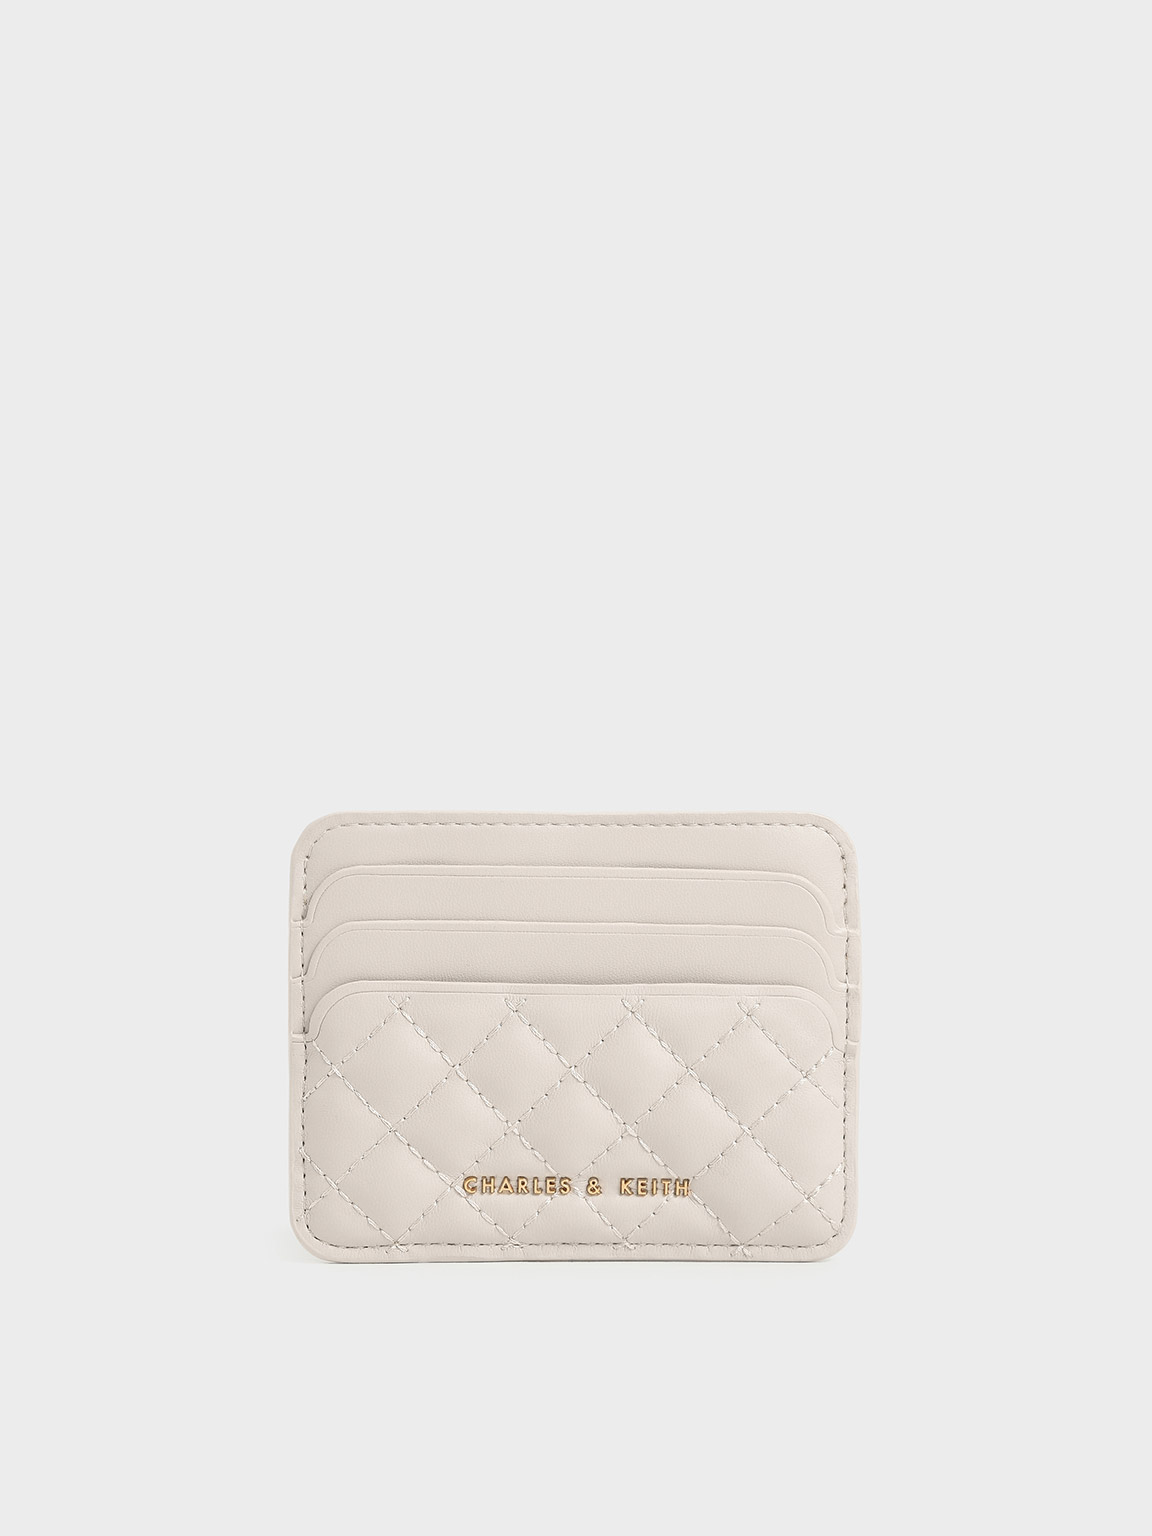 Light Blue Quilted Mini Wallet, CHARLES & KEITH